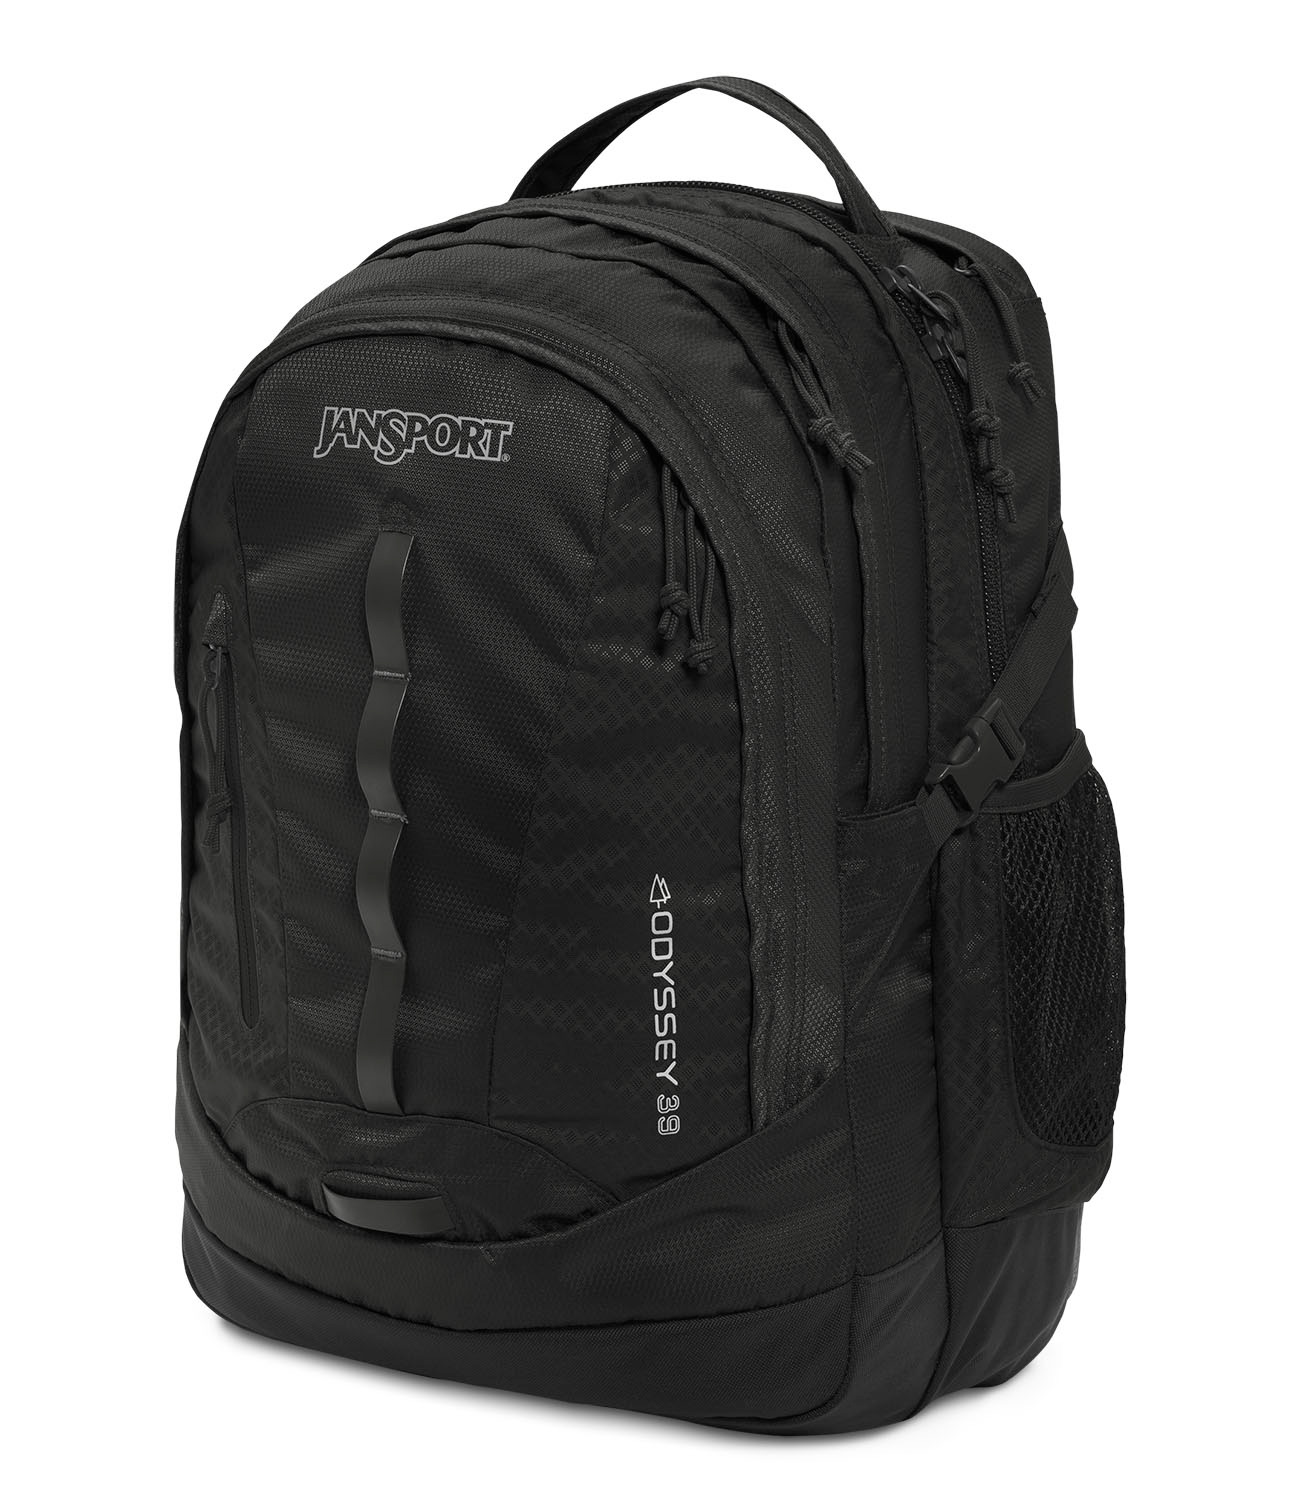 HP Odyssey Backpack - Notebook carrying backpack | texas.gs.shidirect.com